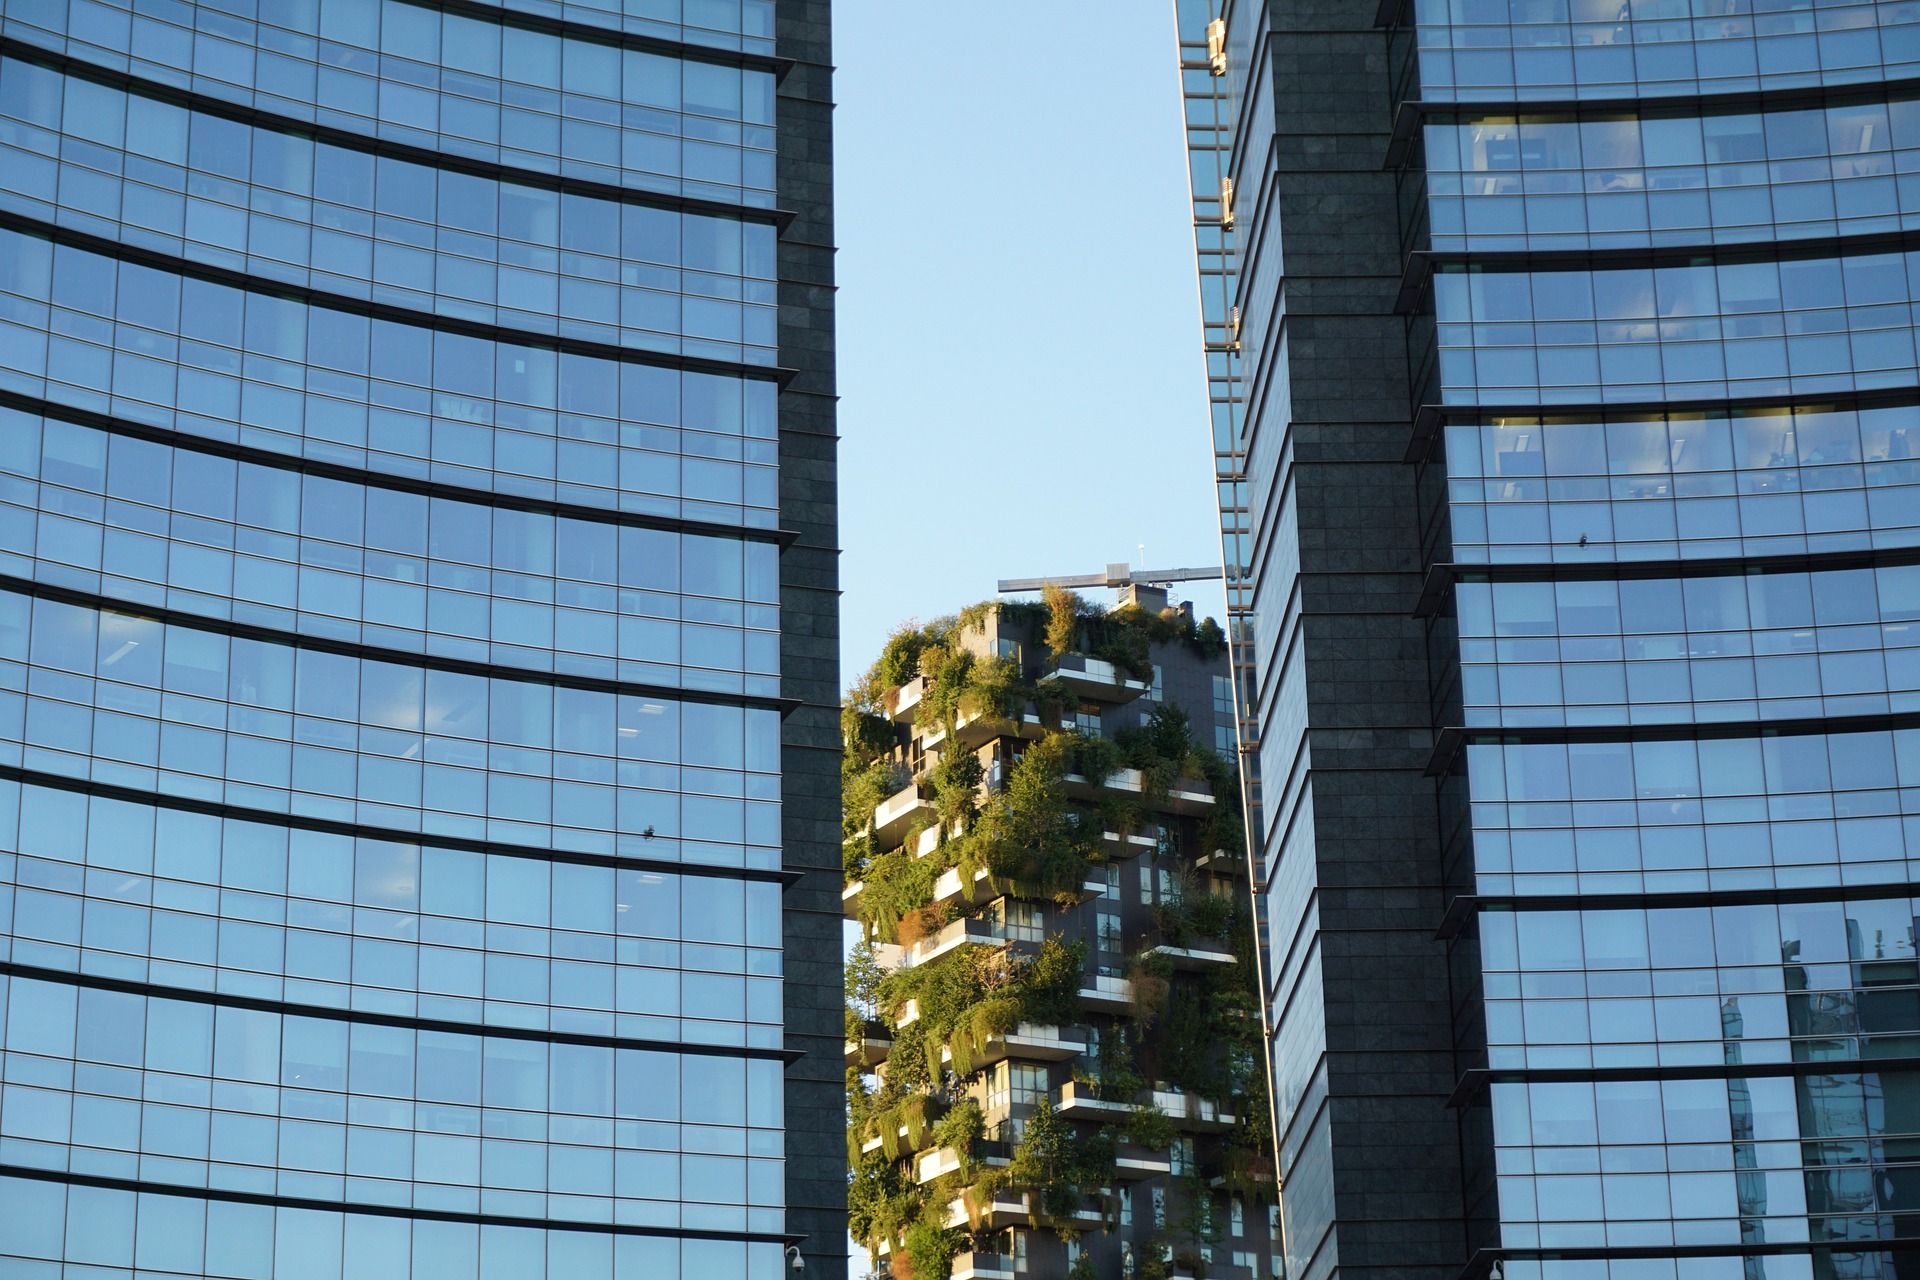 A picture of the Bosco Verticale in Milan, Italy